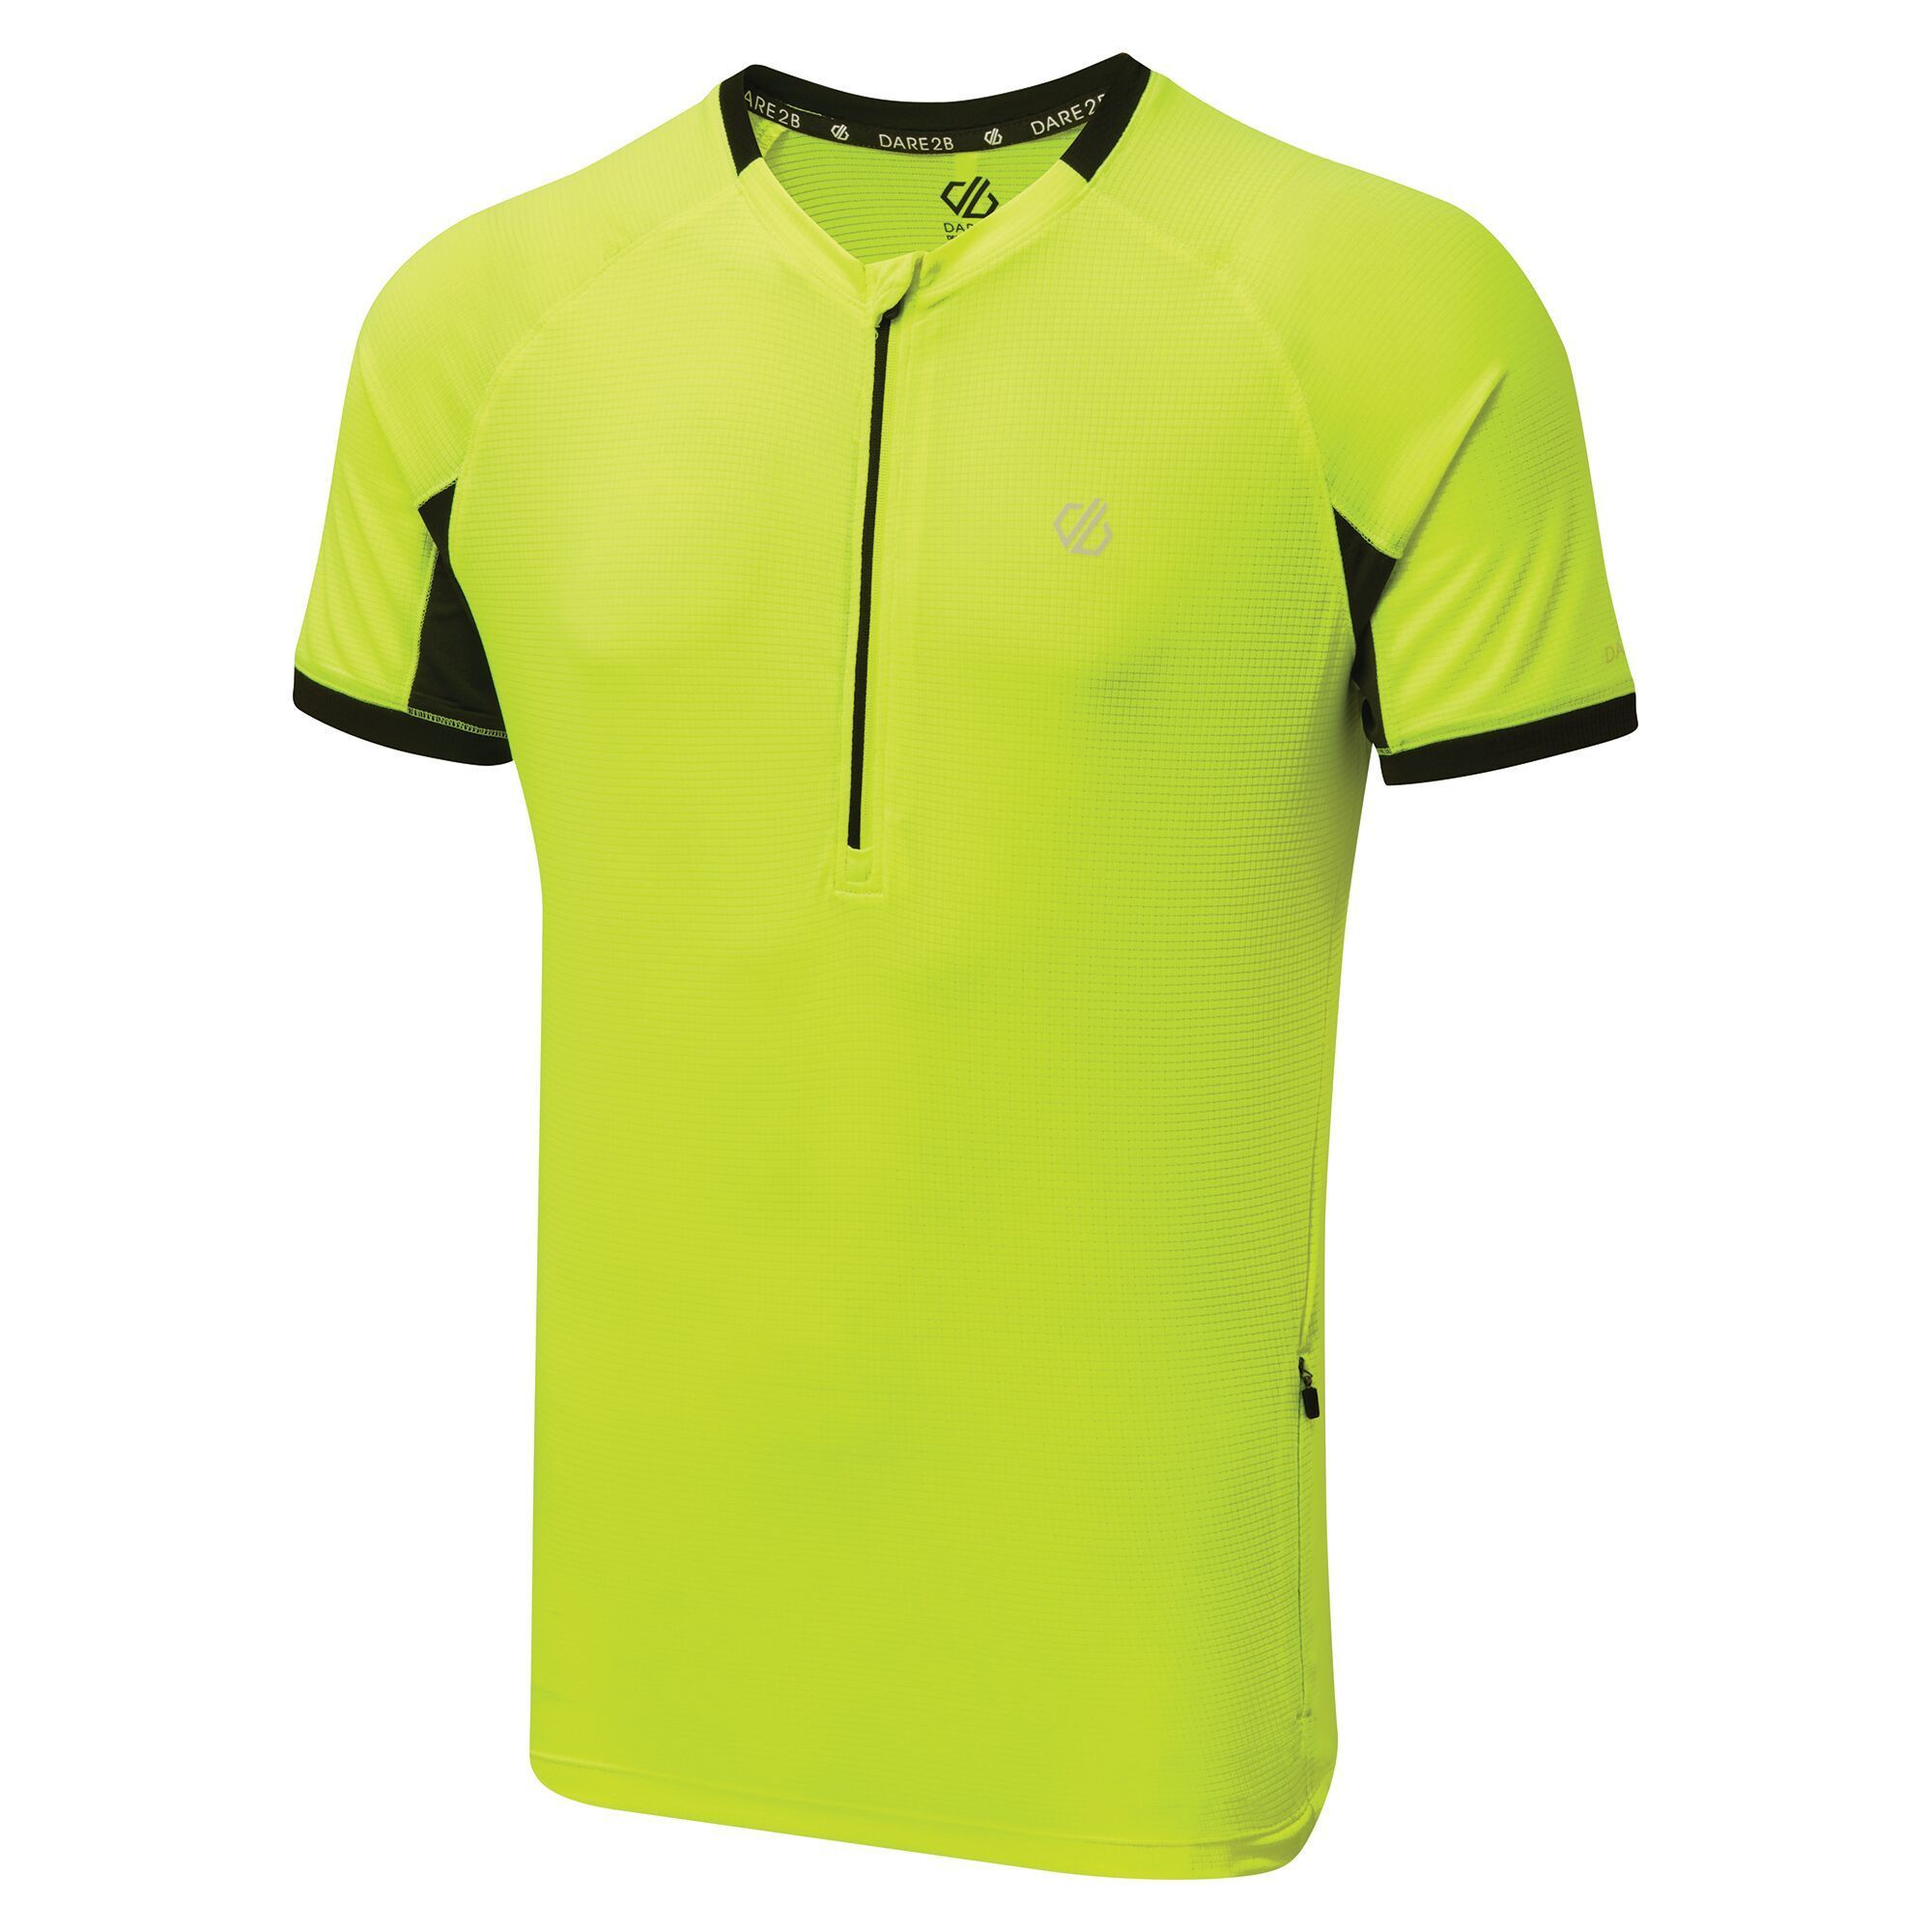 Material: 100% Polyester (Q-Wic Plus lightweight polyester fabric). Lightweight and breathable cycle jersey with airflow mesh. Built-in anti-bacterial odour control. 1/2 length centre front venting zip with auto-lock slider and inner zip guard. 1 security pocket with invisible zip. Reflective Dare 2B logo print detail.